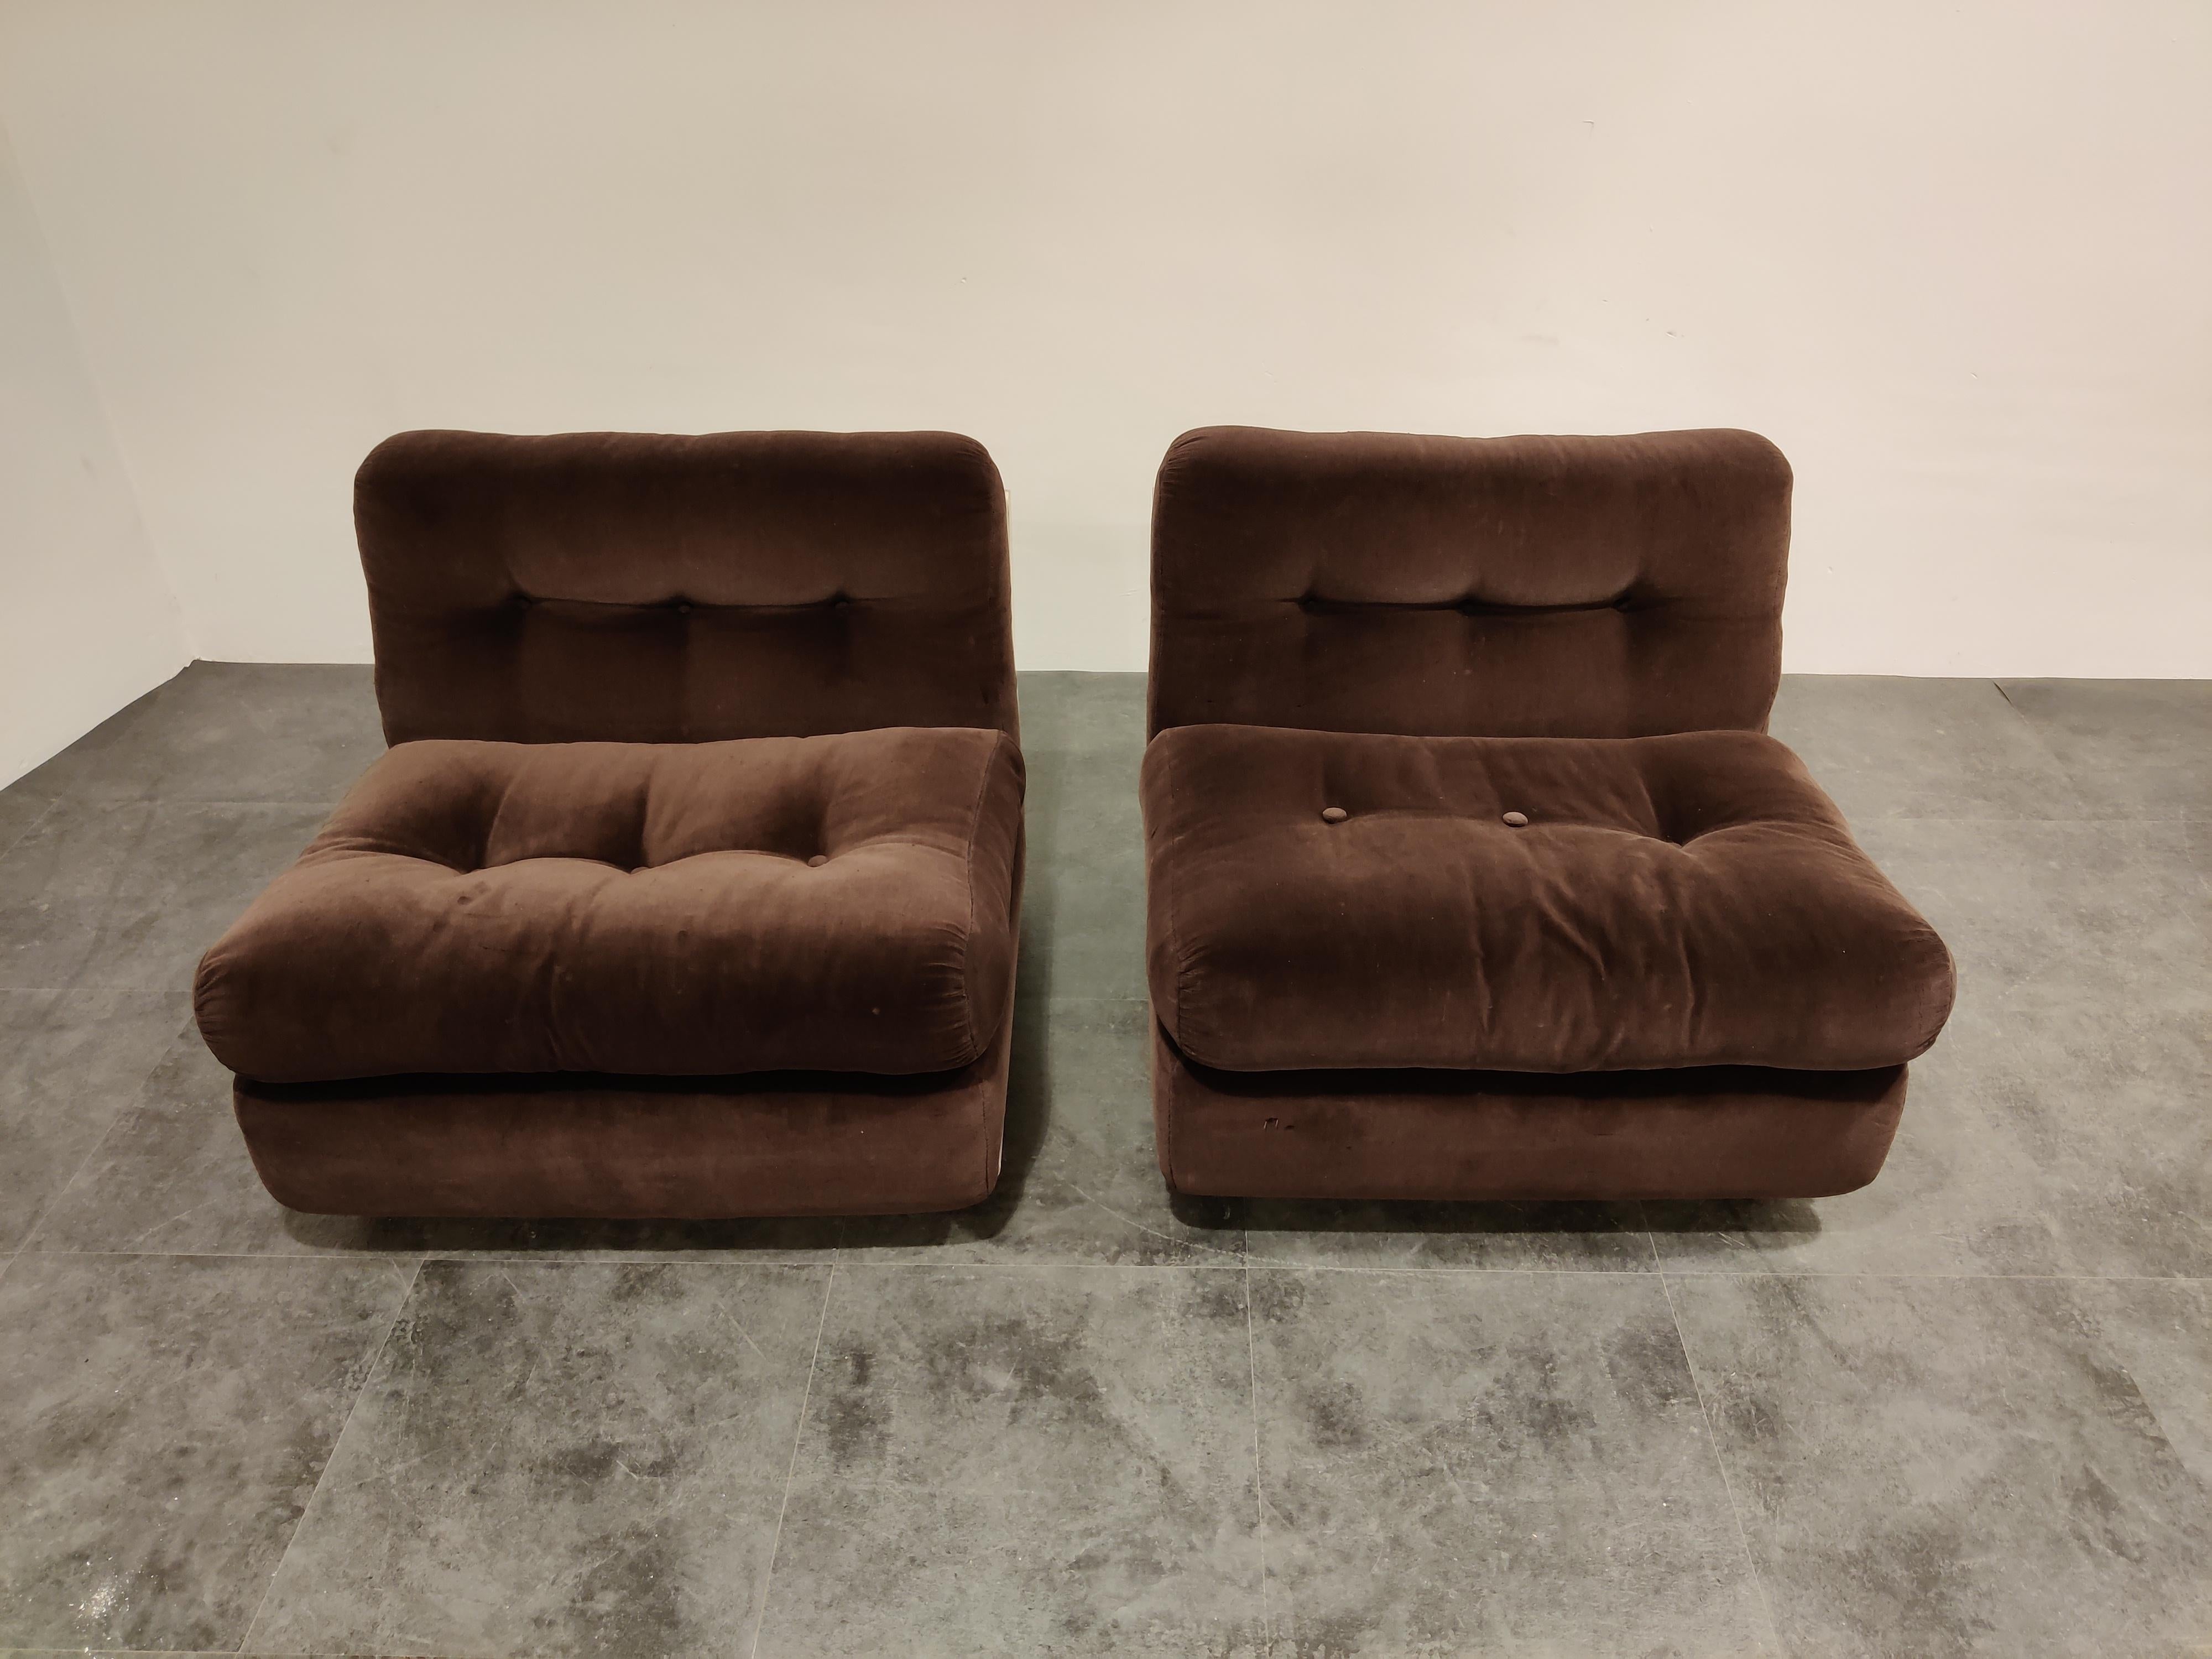 Pair of midcentury model 'Amanta' sofa's or lounge chairs designed by Mario Bellini for C&B Italia.

Space age design Classic that never gets old.

Beautiful original condition, original upholstery.

Good condition with normal signs of